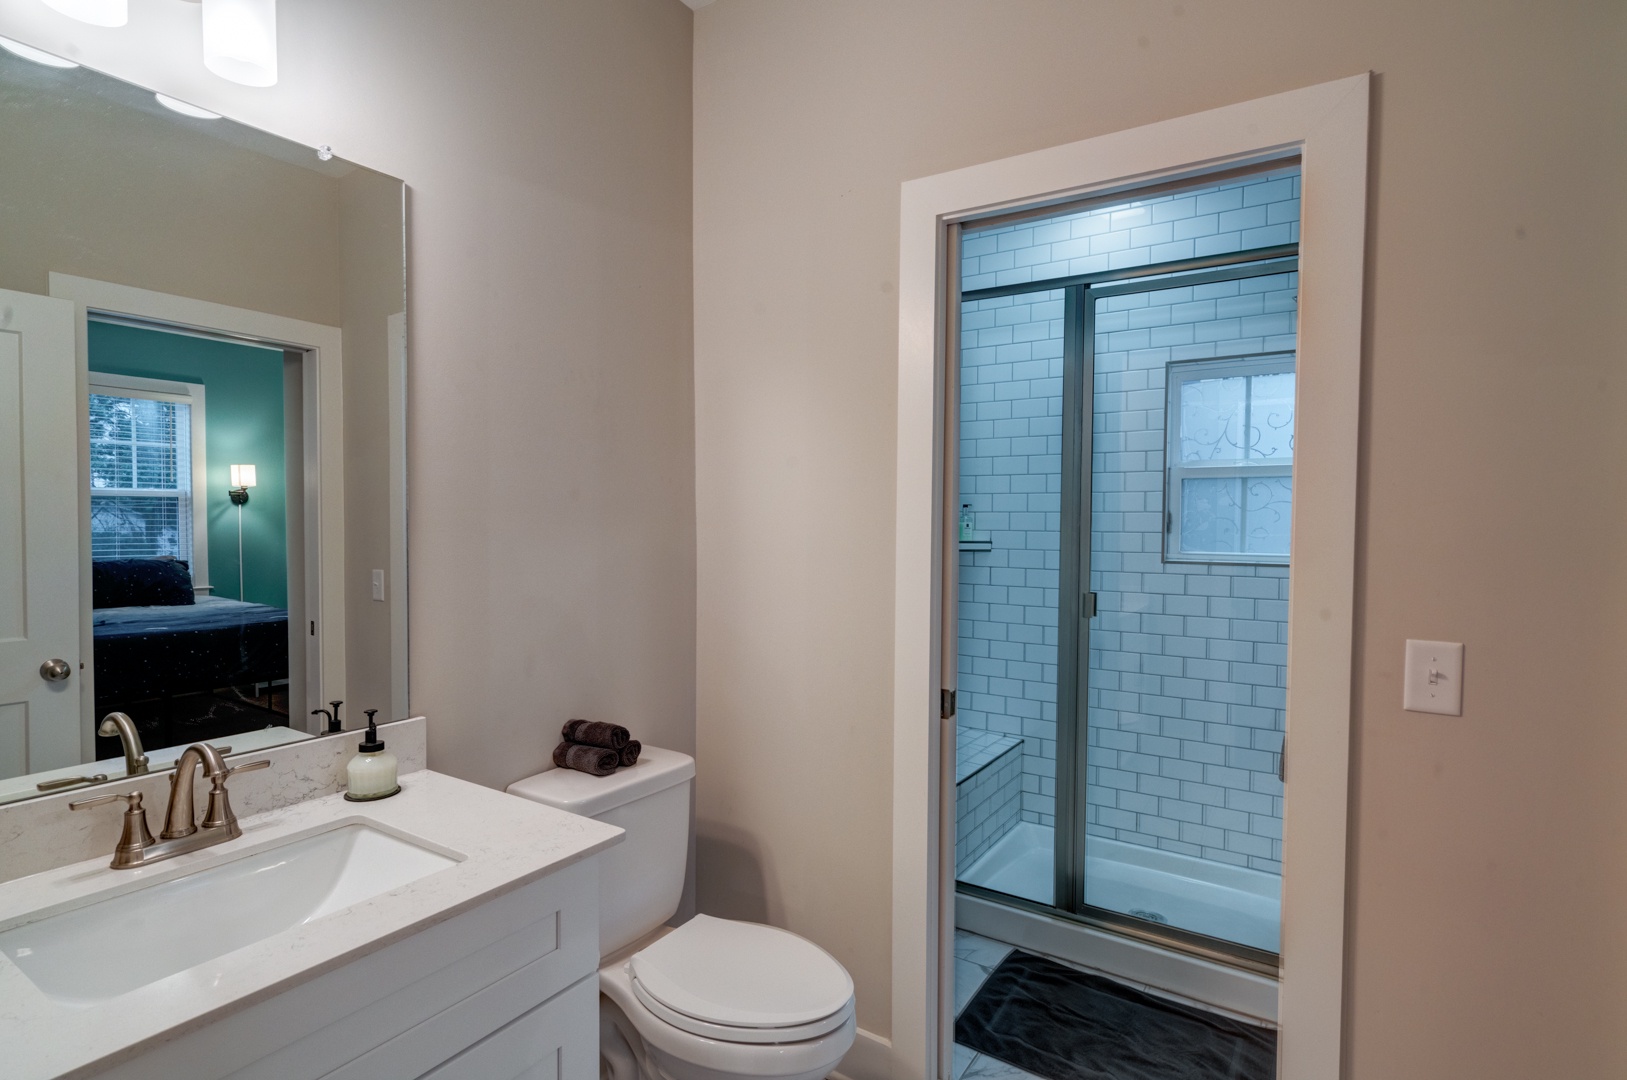 The 2nd floor king ensuite includes a single vanity & glass shower